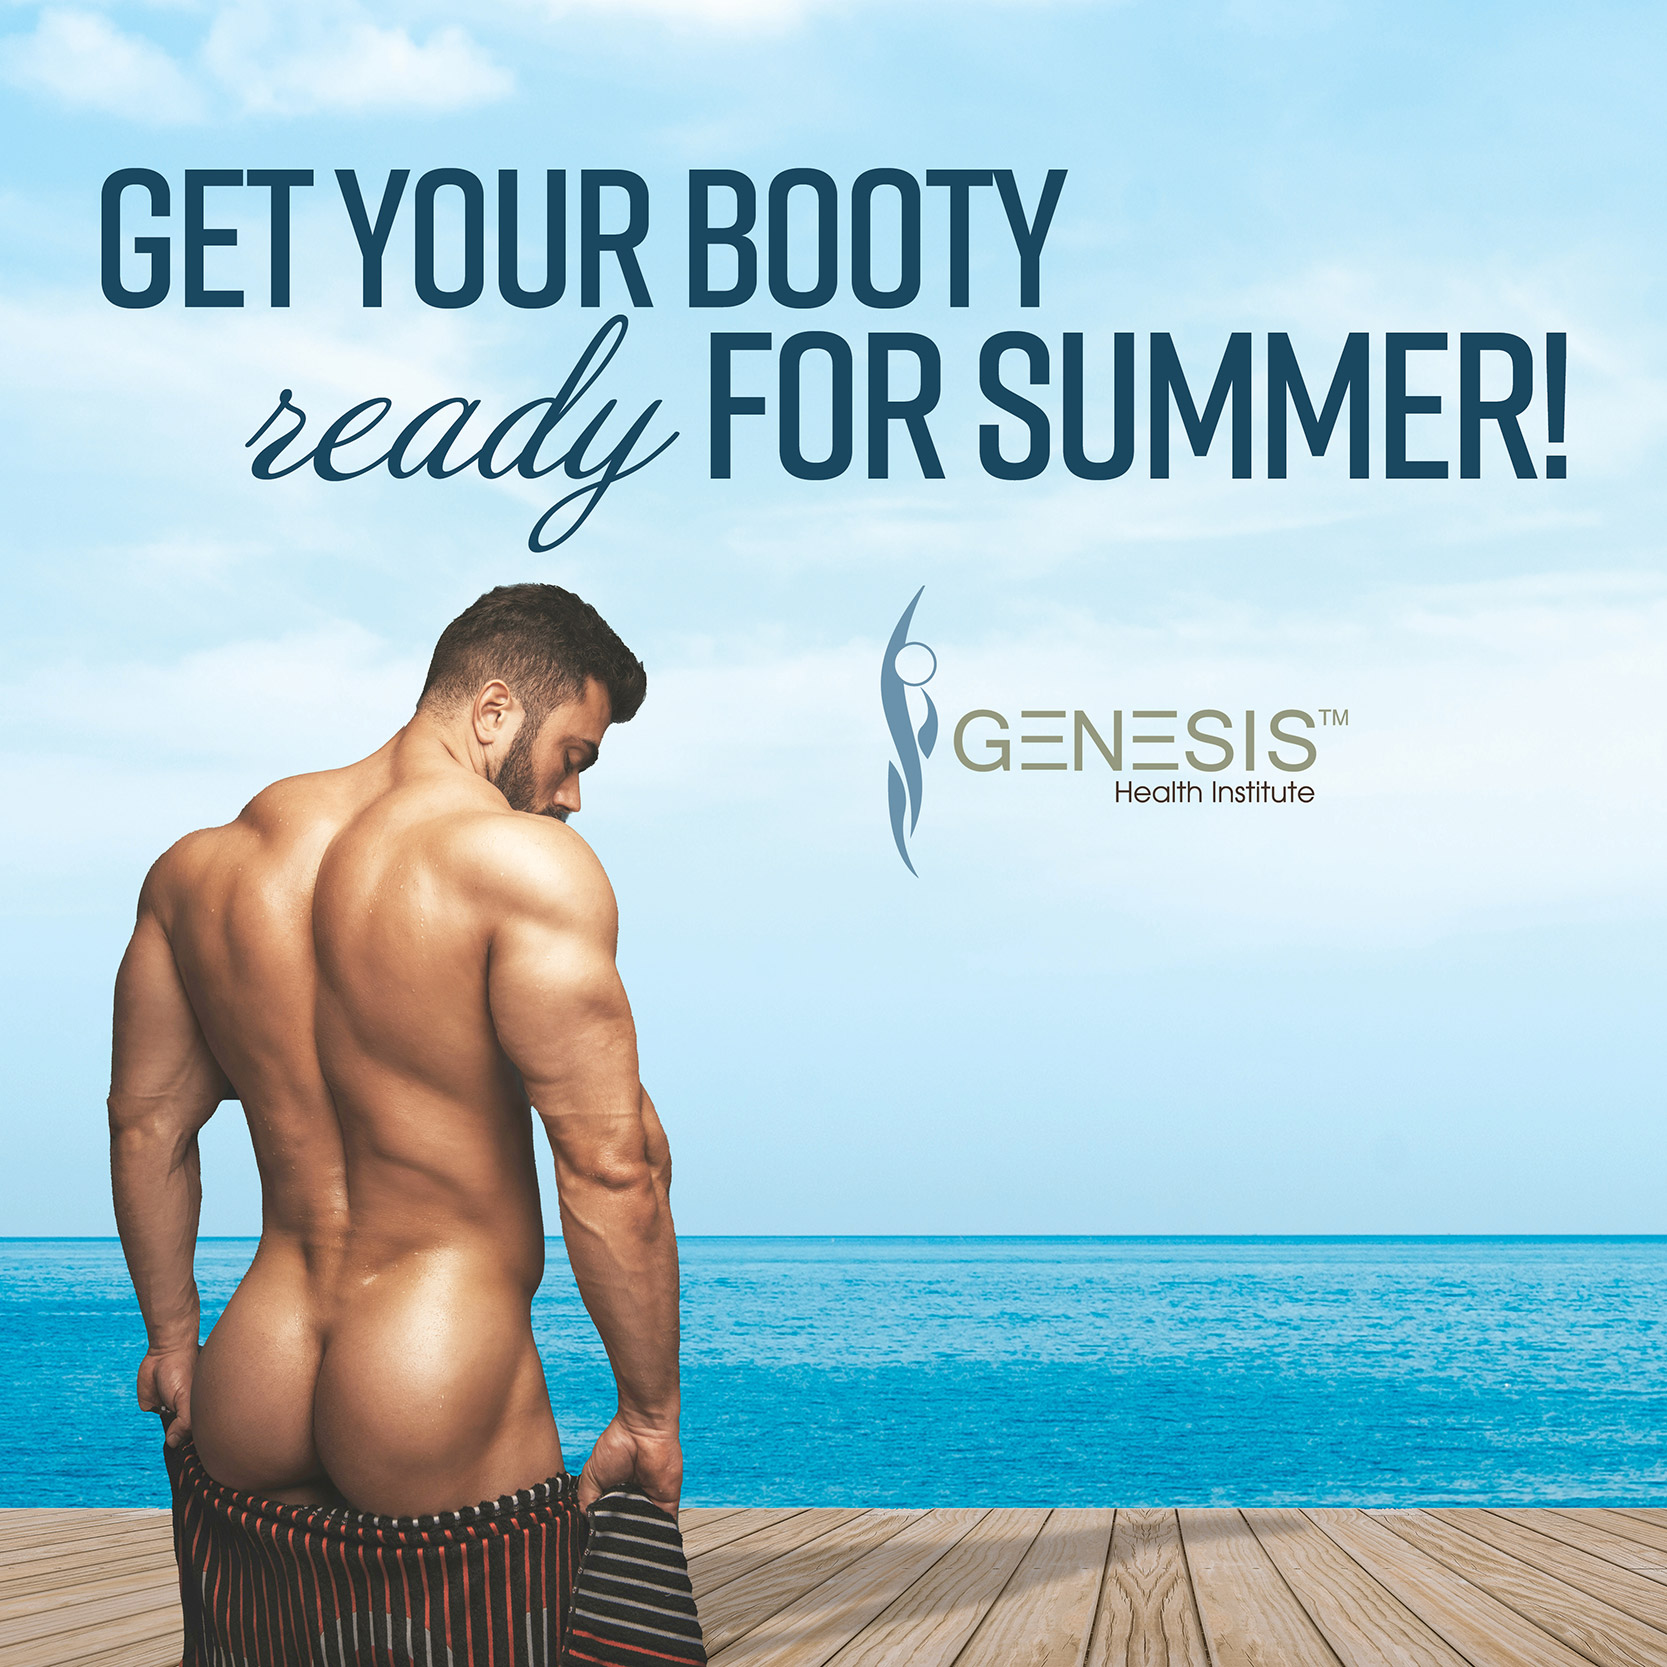 Get you booty ready for summer with Genesis Health Institute